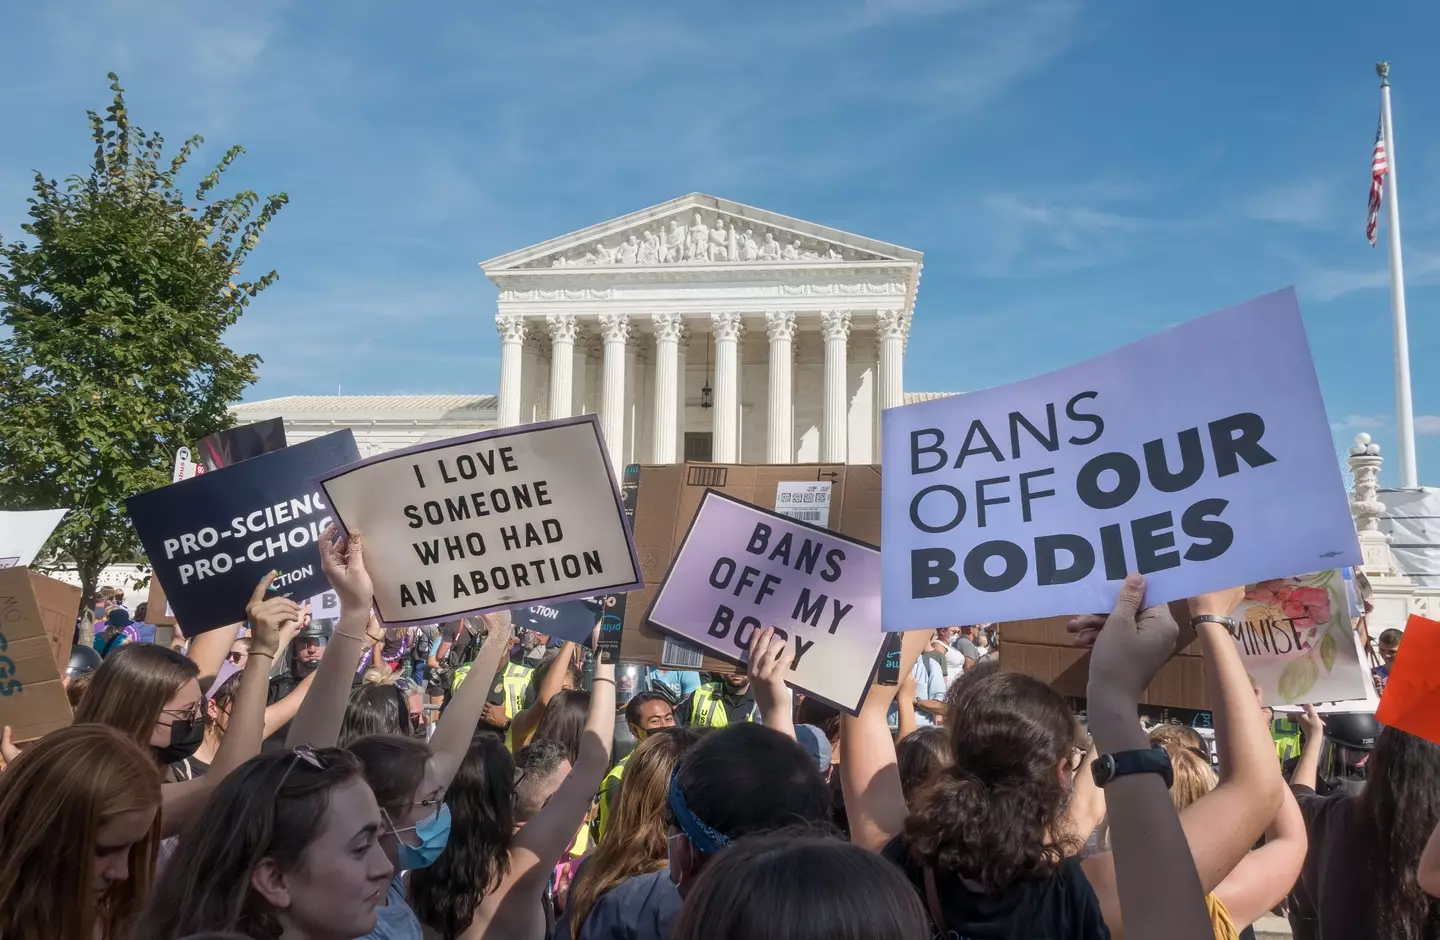 A judge in the US has temporarily blocked the new law abortion laws in Texas (